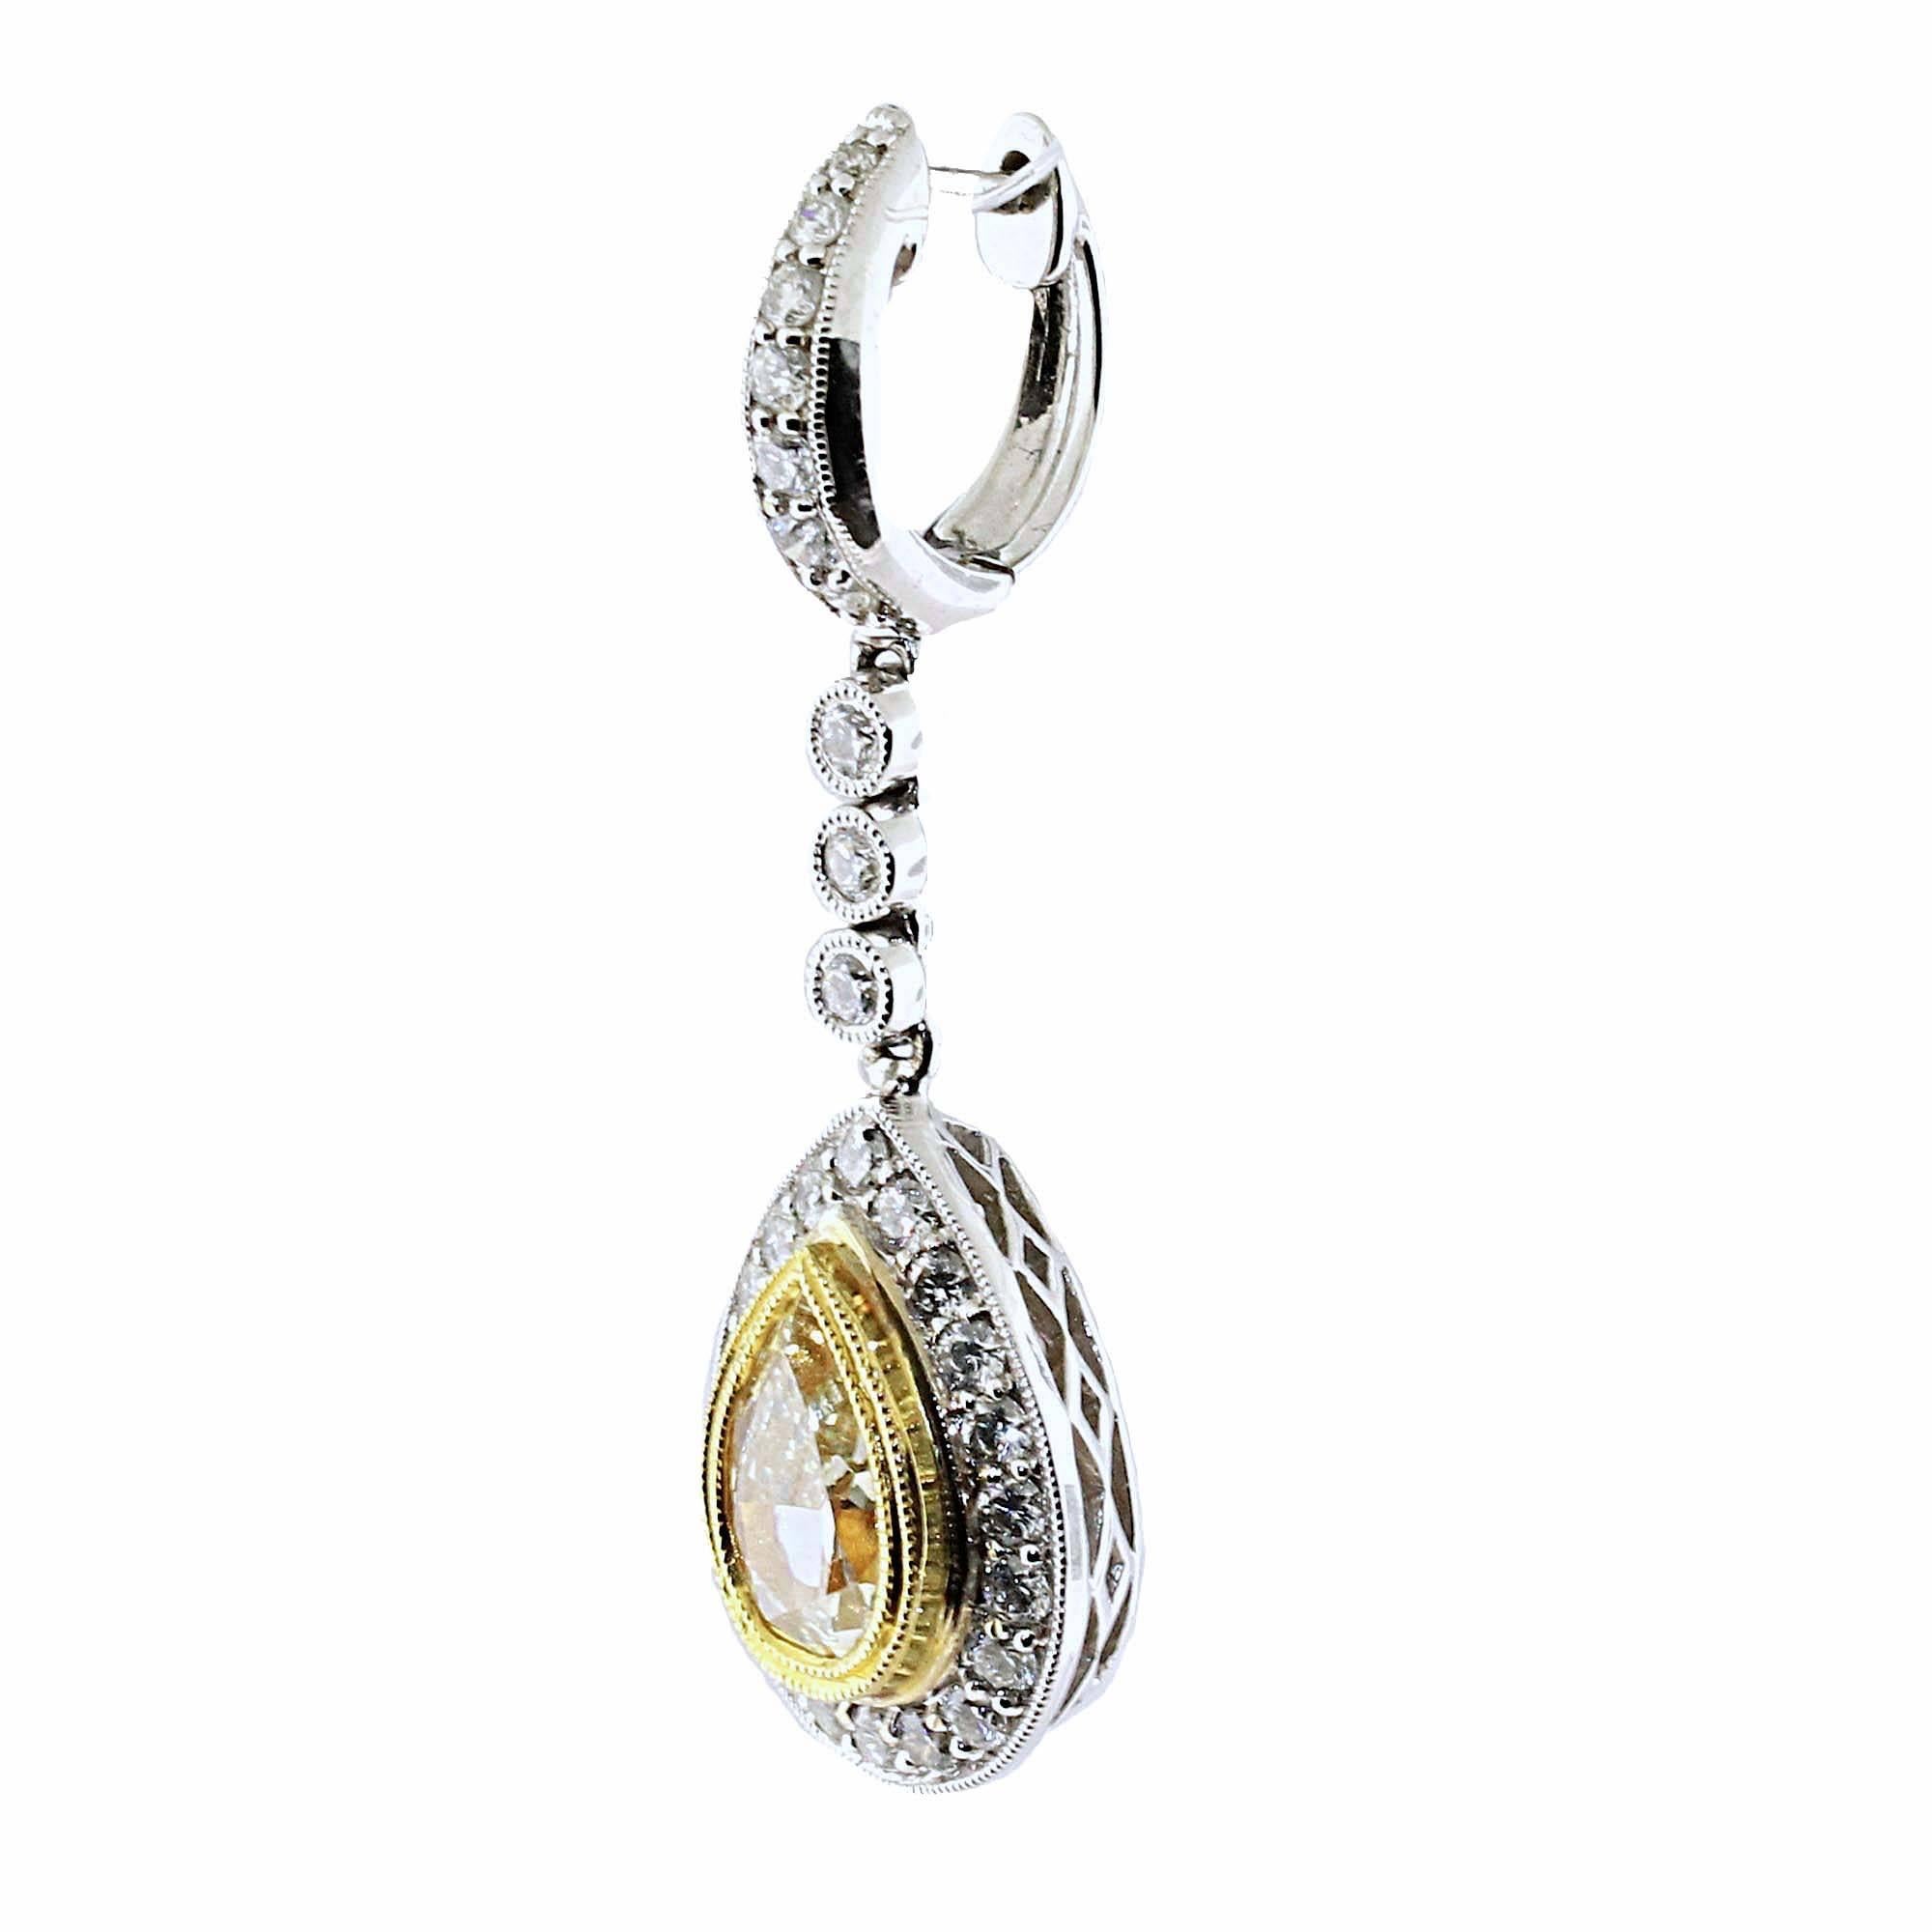 Spectacular long white and yellow diamond drop earrings. All these diamonds combine together to create this gorgeous pair of earrings. Wear them to a fancy event, or with jeans and a T-Shirt. 

2 Pear Shapes are yellow diamonds weighing